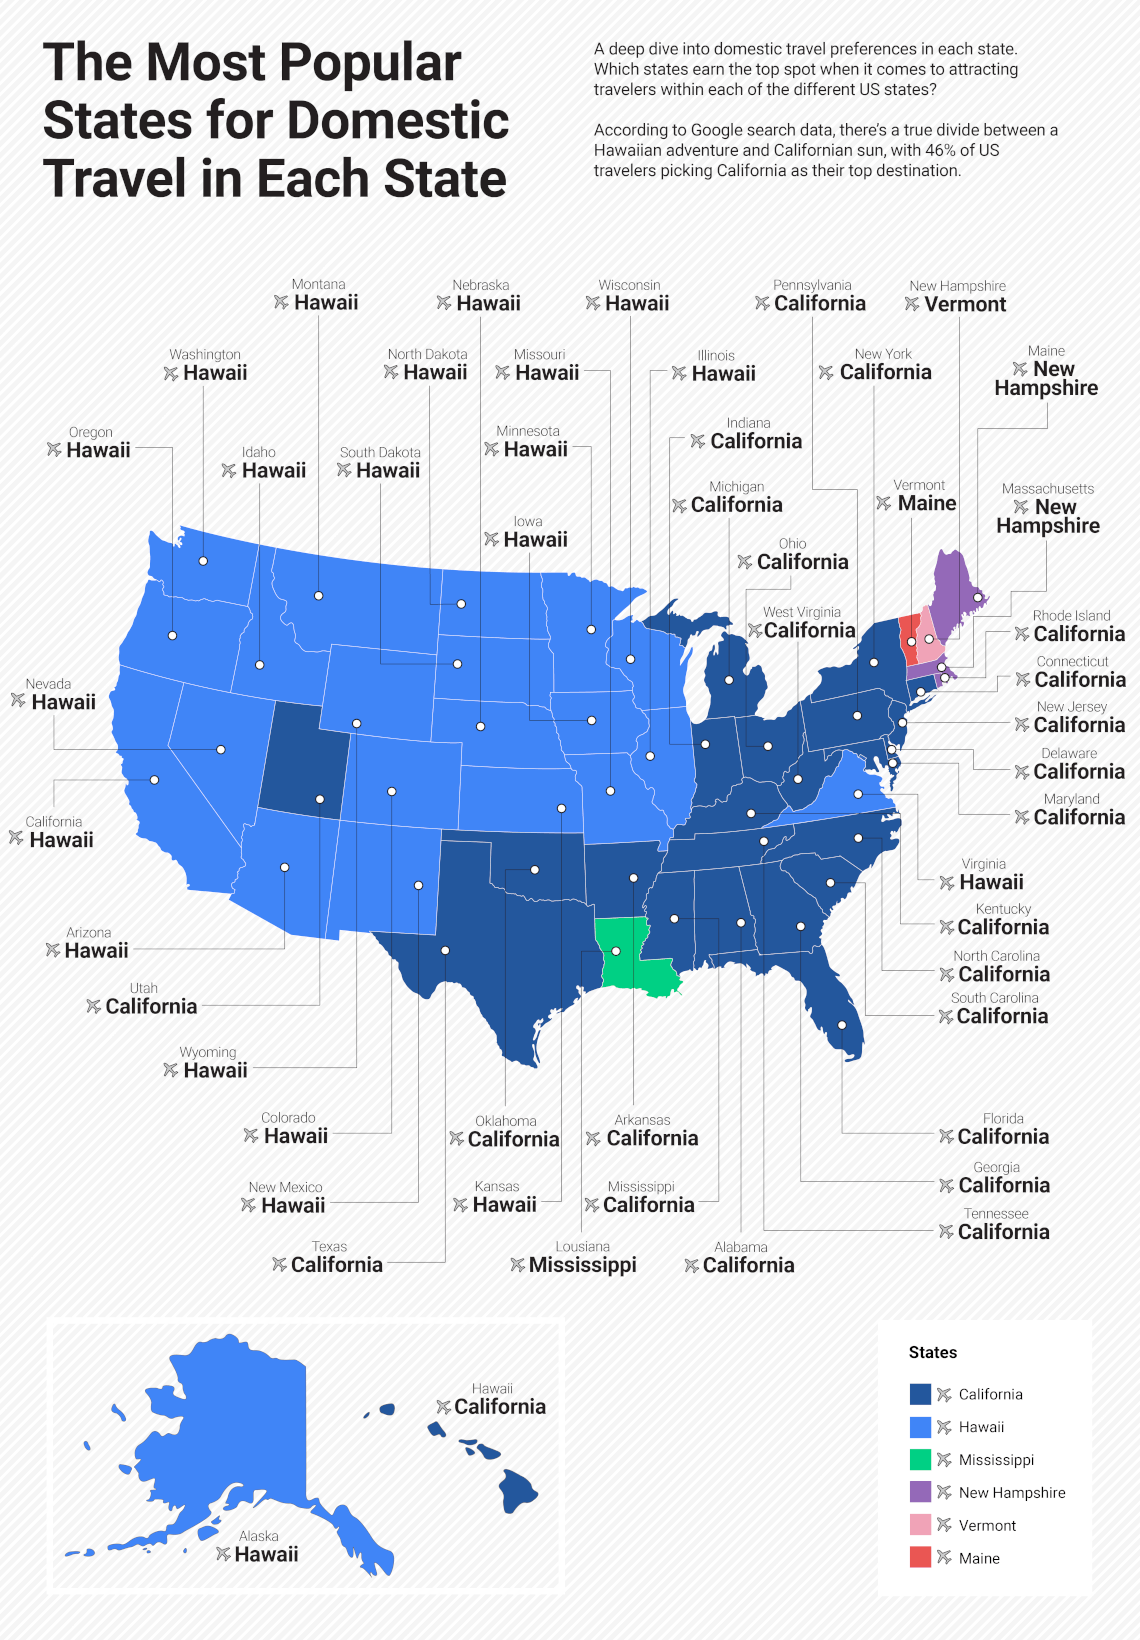 The Most Popular States for Domestic Travel in Each State